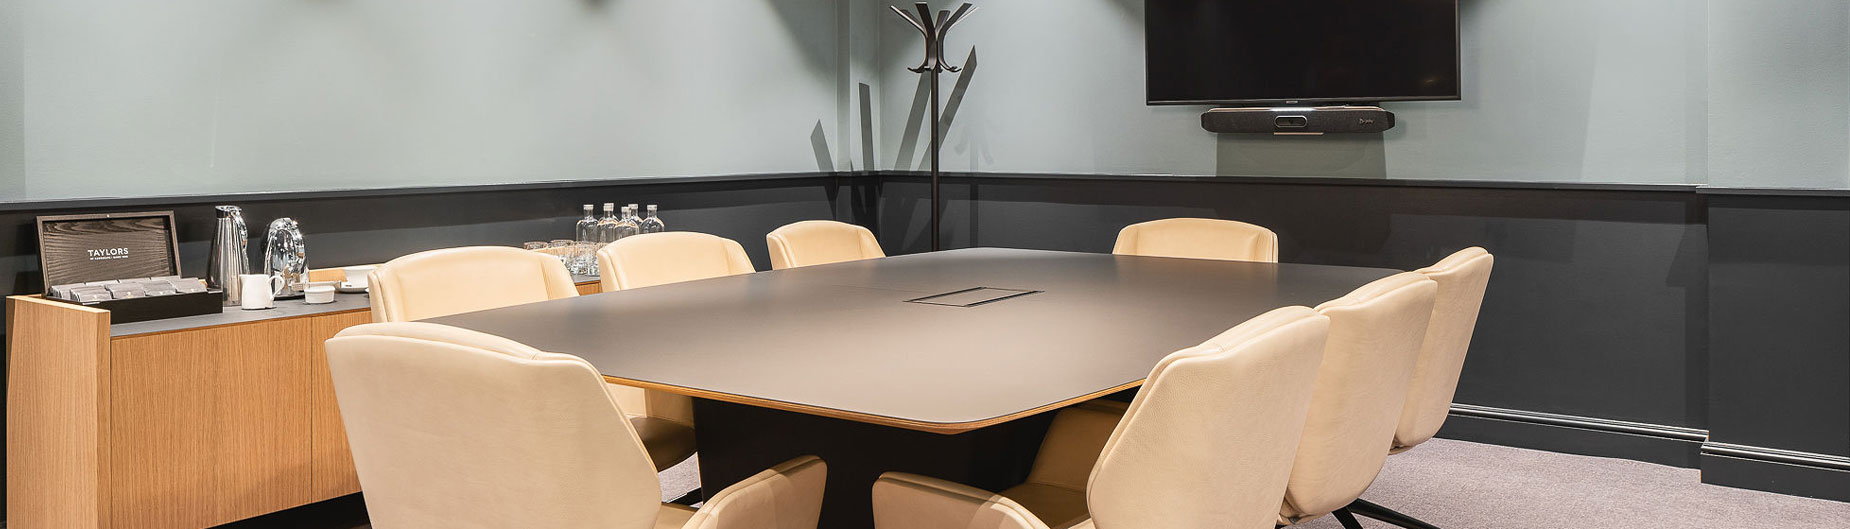 Pall-Mall-Letterbox-Meeting-Rooms-2